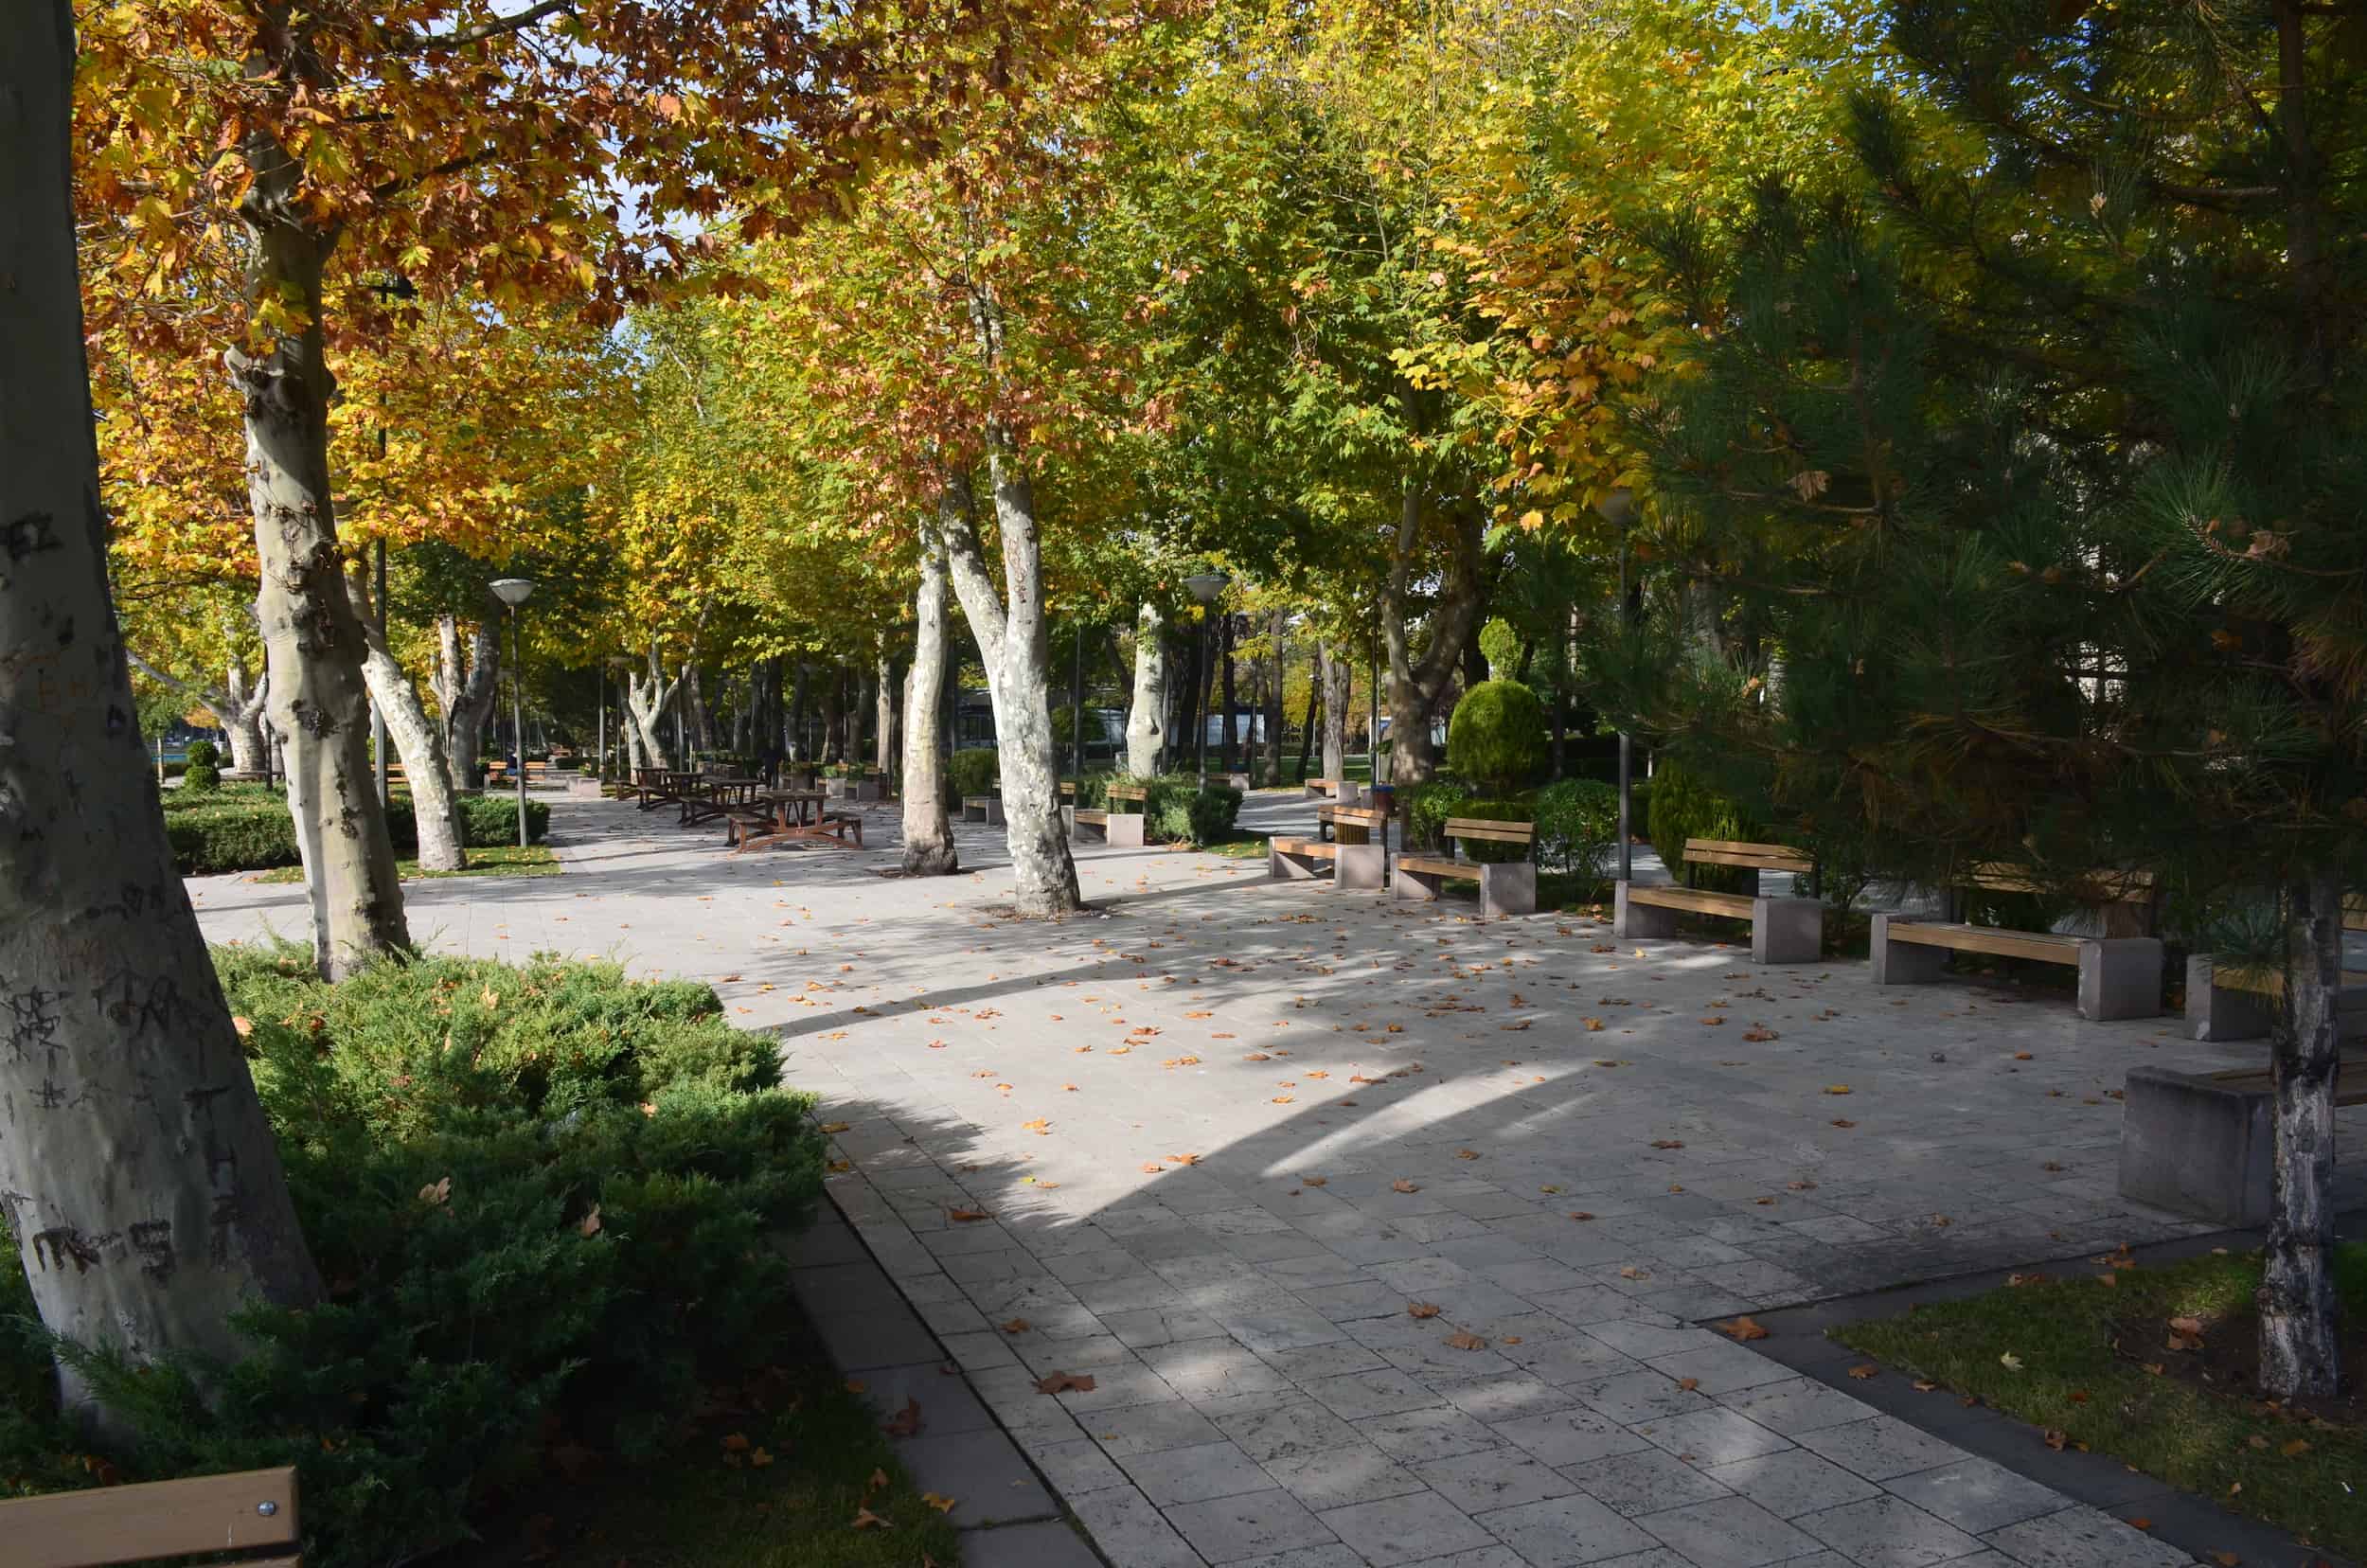 Shaded path with benches and picnic tables at Gençlik Park in Ankara, Turkey